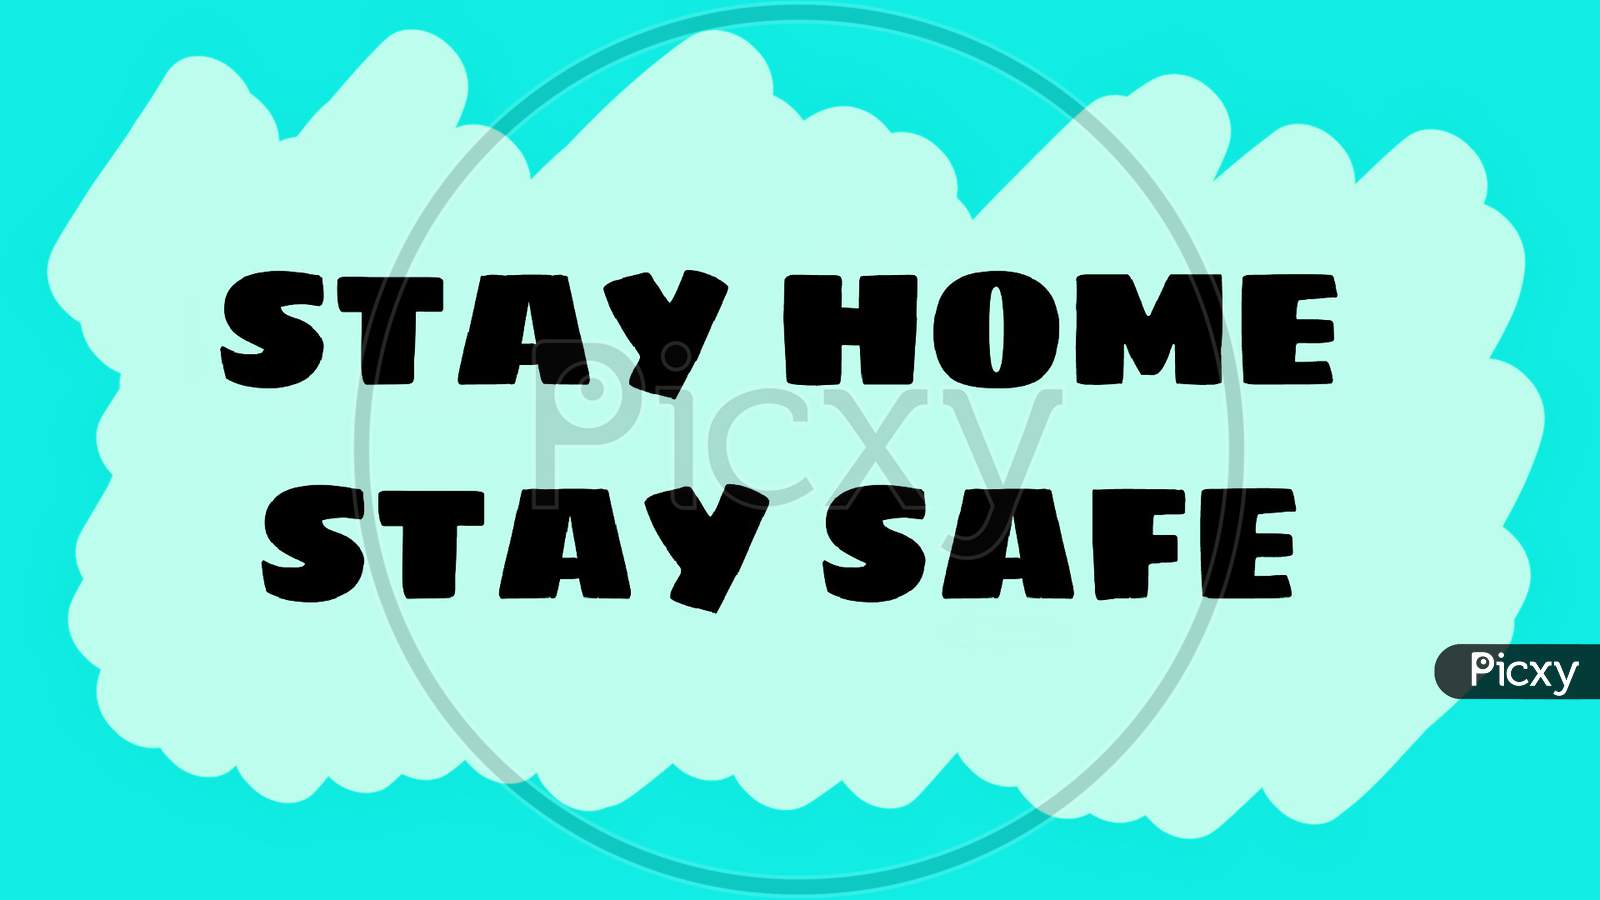 STAY HOME STAY SAFE.